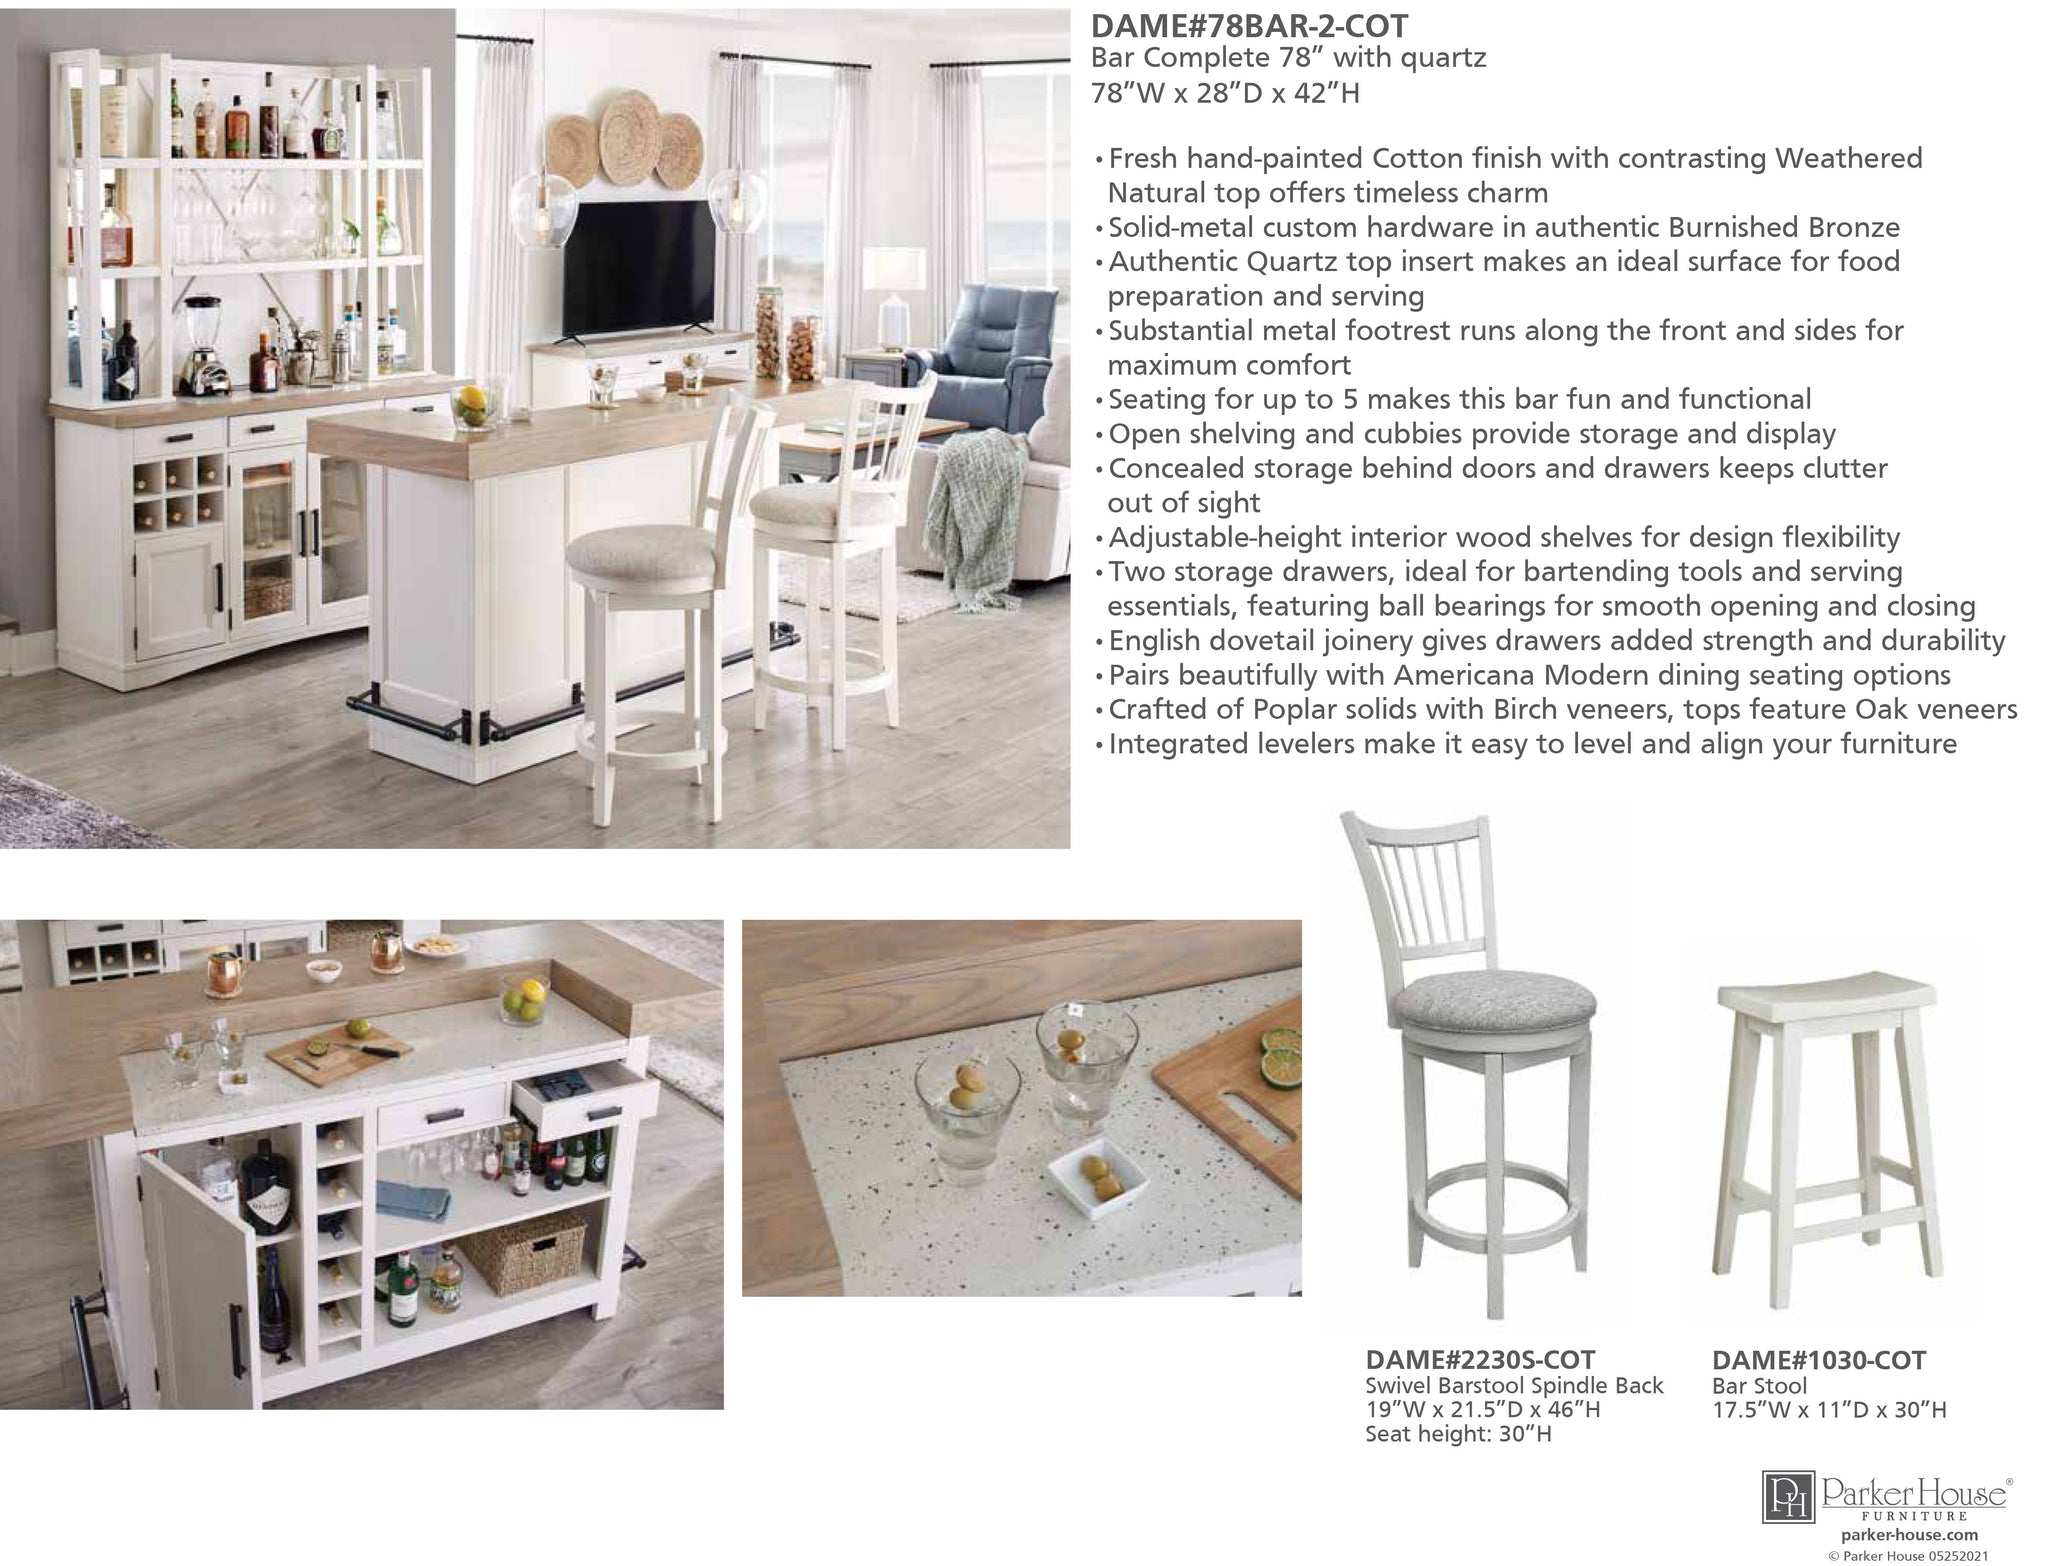 MODERN DINING quartz with AMERICANA Complete - Parker Bar 78 House Furniture in.